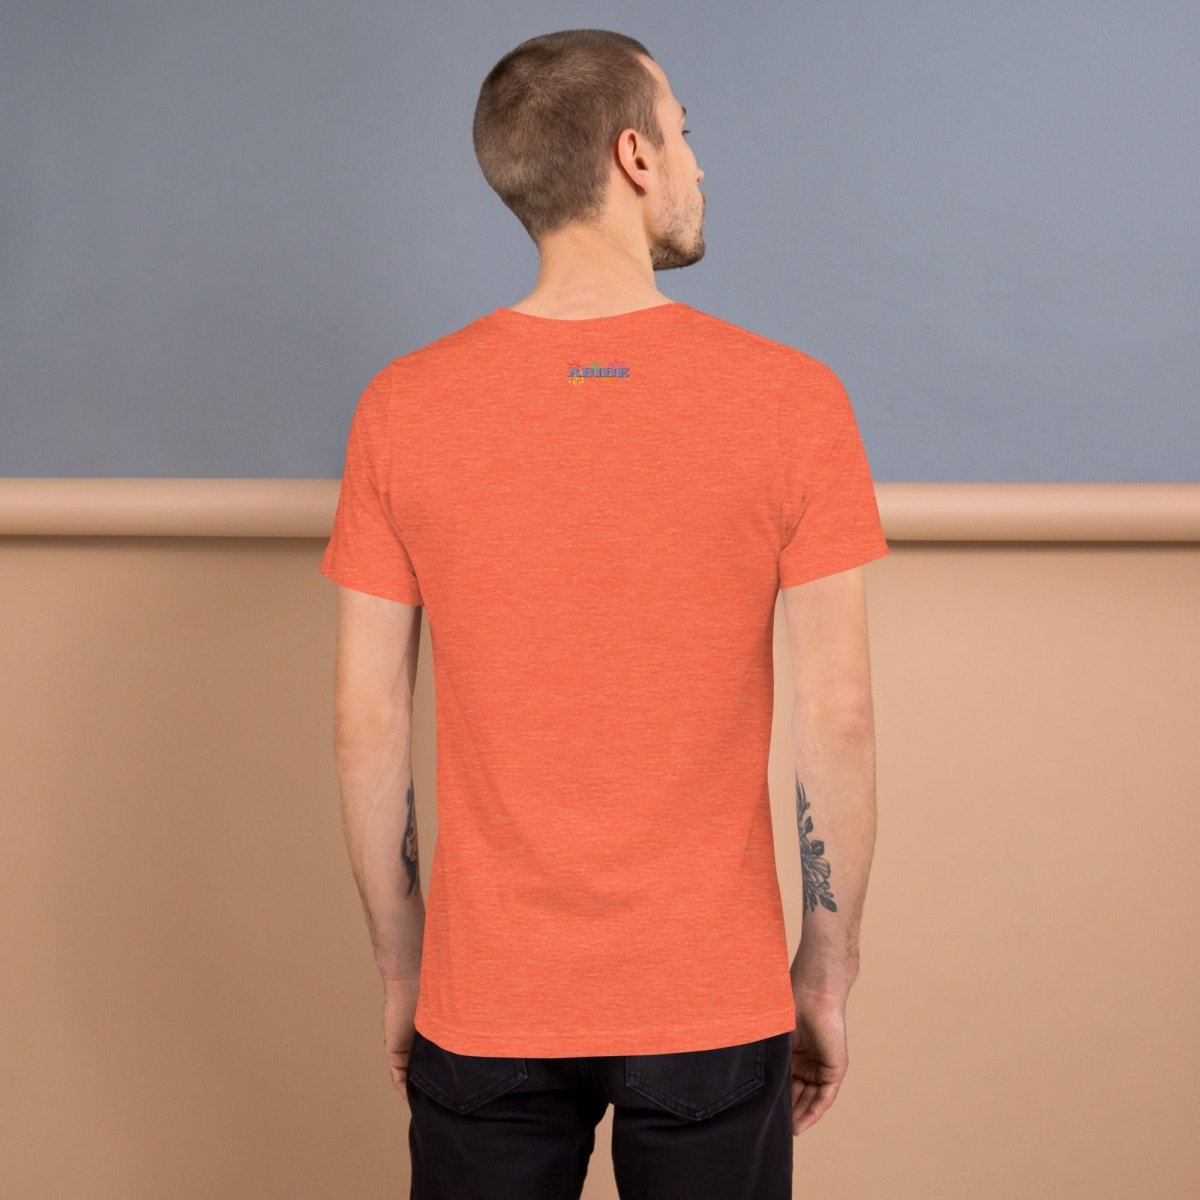 Dad Noises- Dadisms - Don't Make Me Pull This Car Over Orange Unisex t-shirt back view - The Dude Abides - Birthday